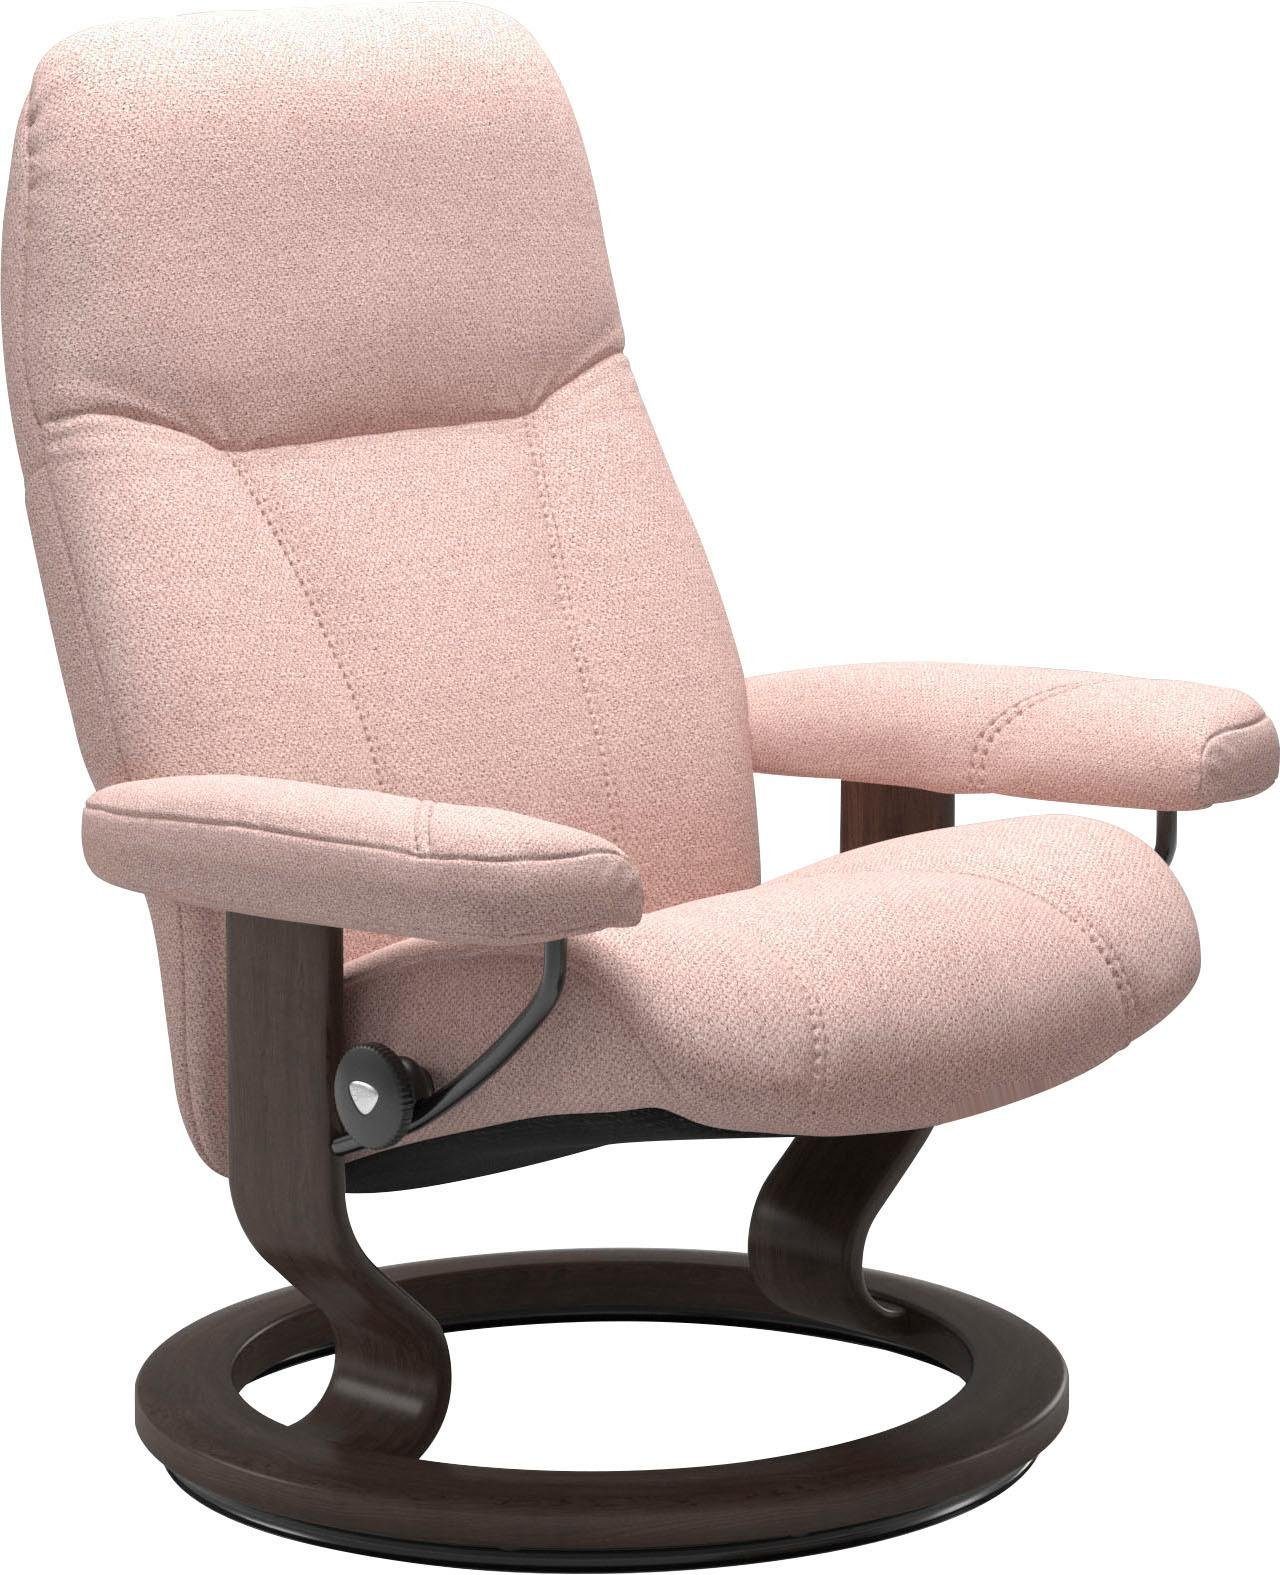 Stressless® Relaxsessel Gestell Base, Wenge Classic M, mit Consul, Größe